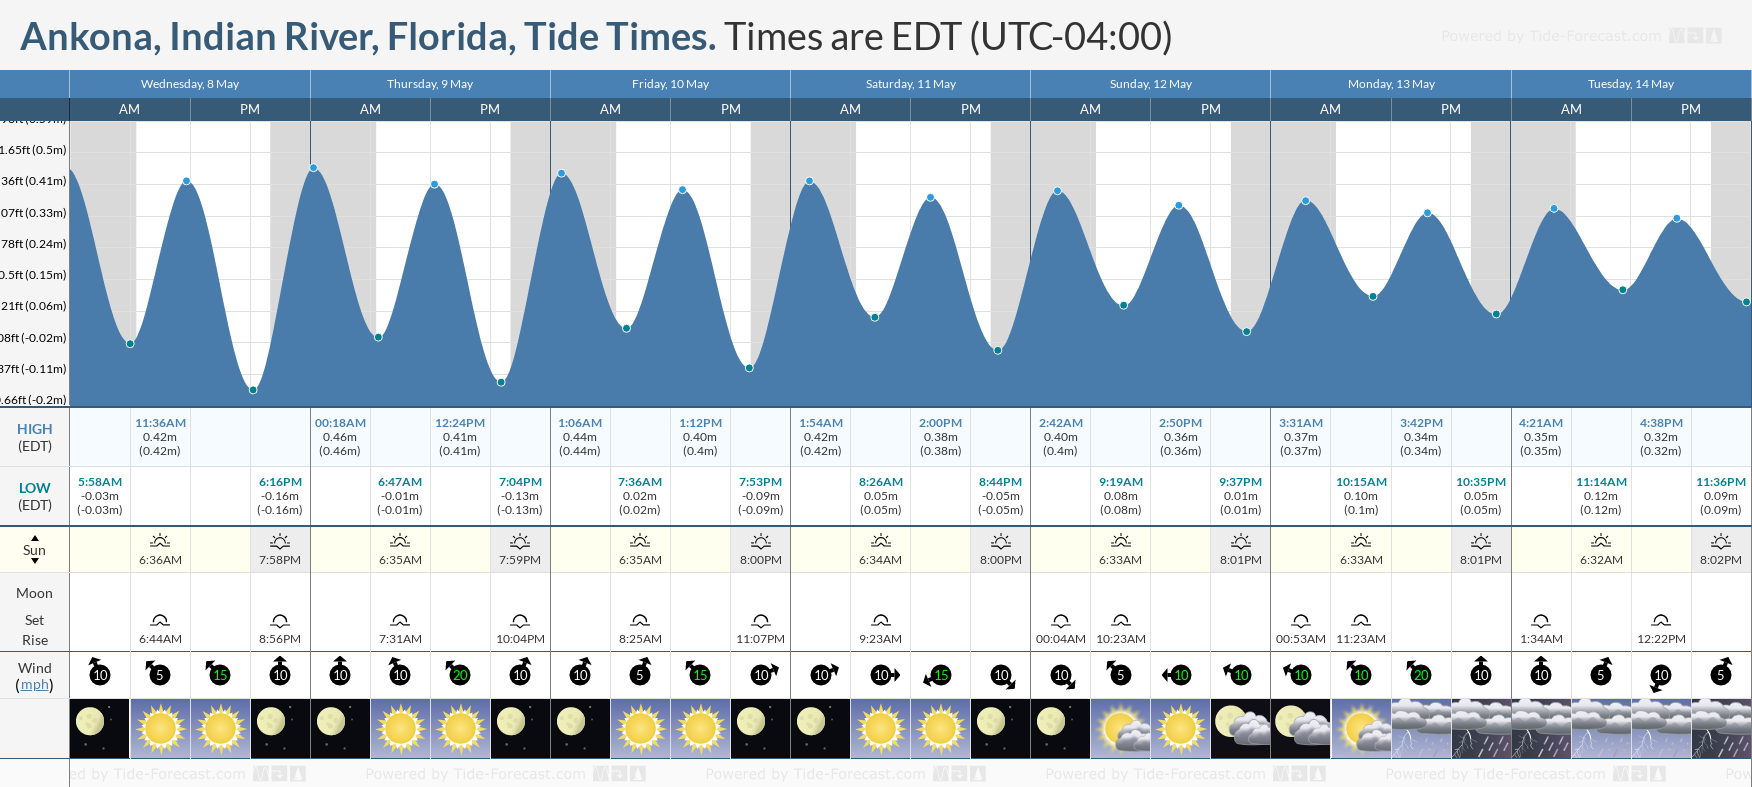 Ankona, Indian River, Florida Tide Chart including high and low tide tide times for the next 7 days